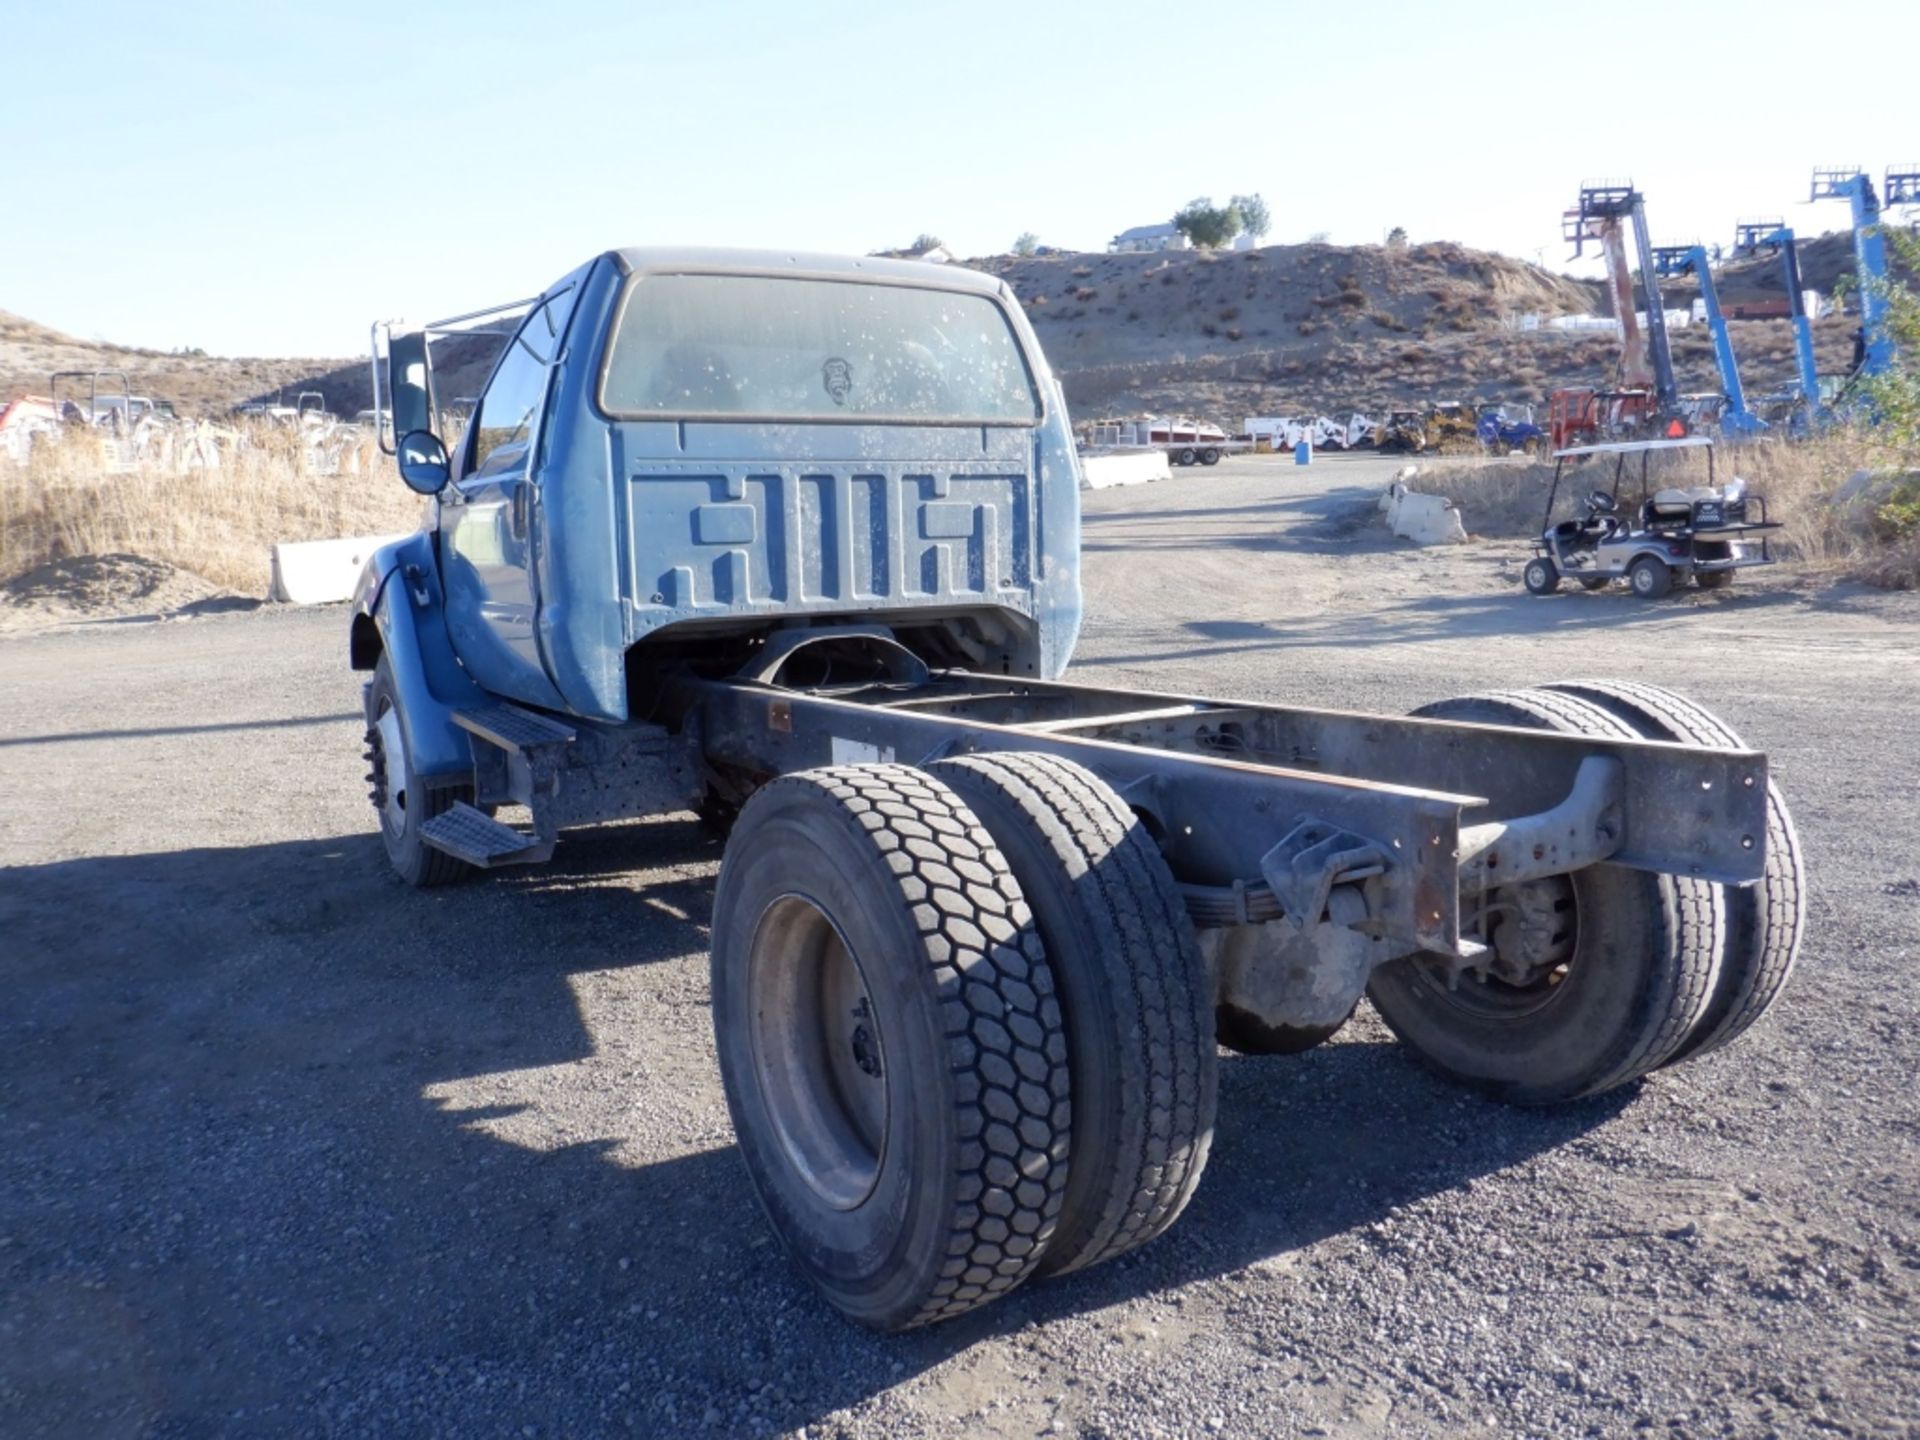 Ford F650 Super Duty Cab & Chassis, - Image 8 of 36